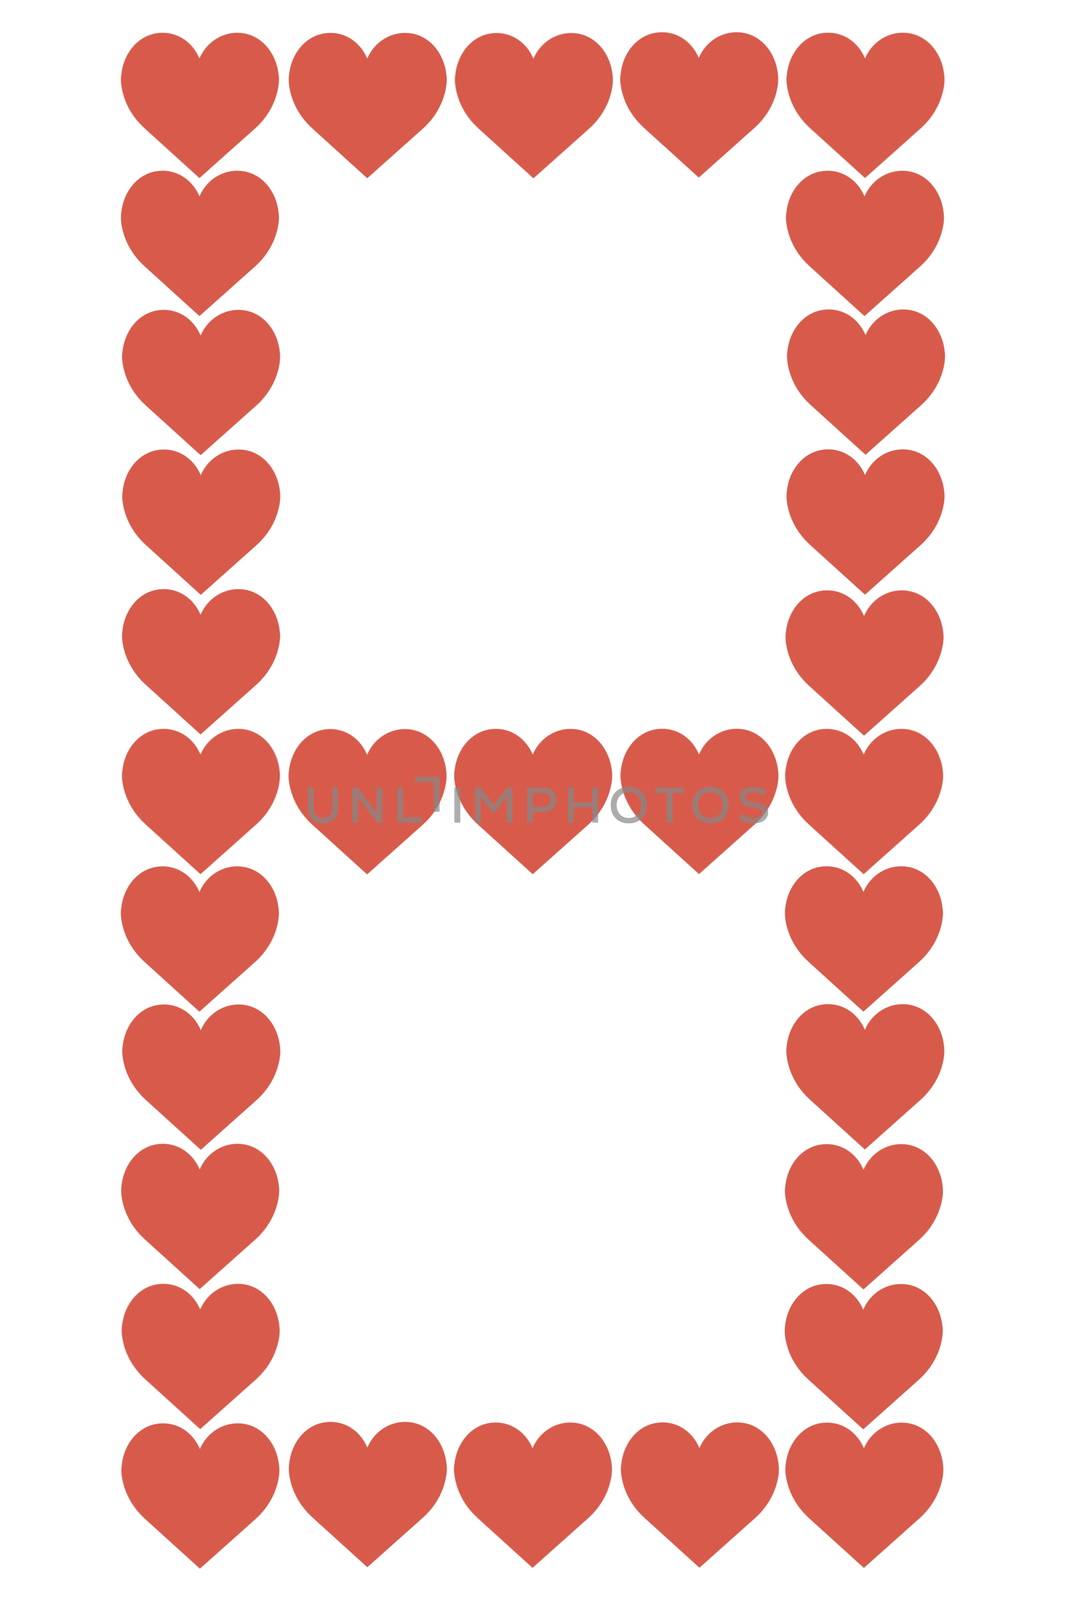 Red Hearts Design on White Background. Love, Heart, Valentine's Day. Can be used for Articles, Printing, Illustration purpose, background, website, businesses, presentations, Product Promotions etc. by sn040288